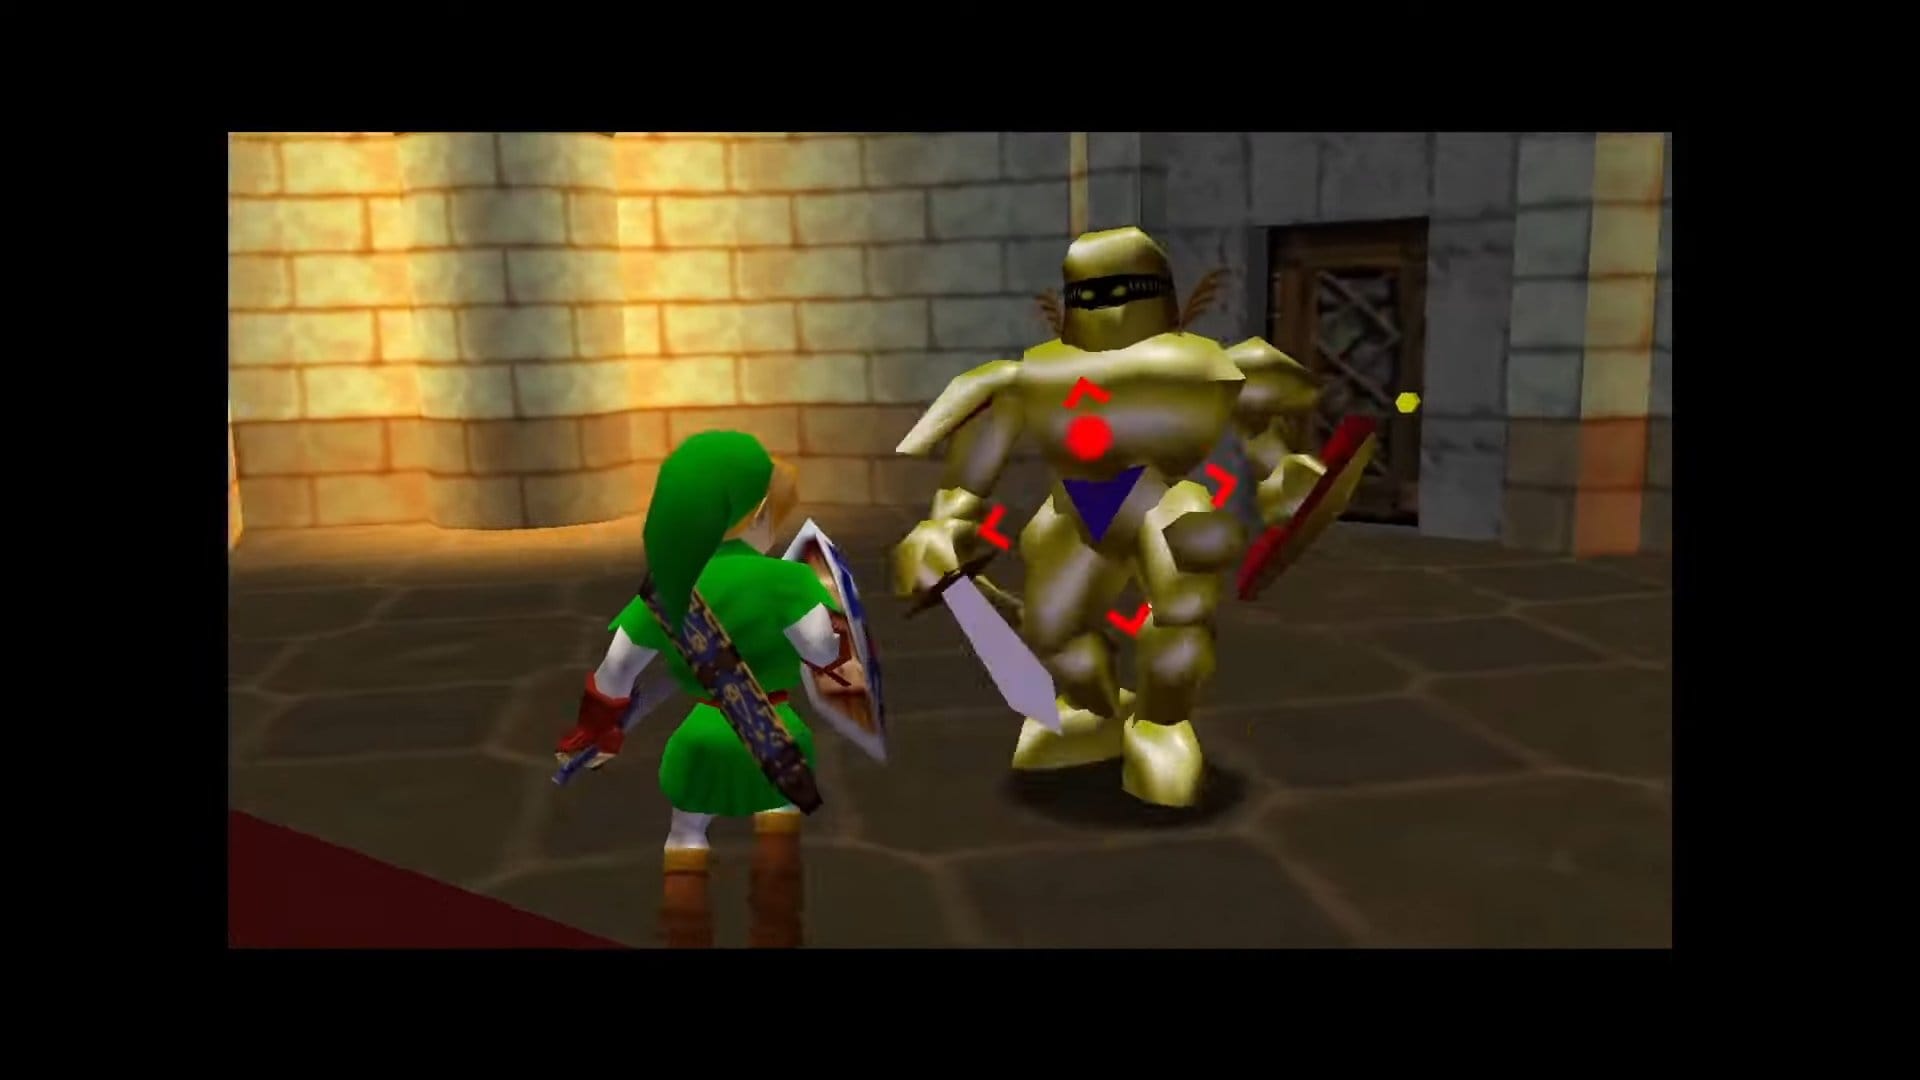 A new 'unofficial' Ocarina of Time PC version has been released, with no  Nintendo code or art assets